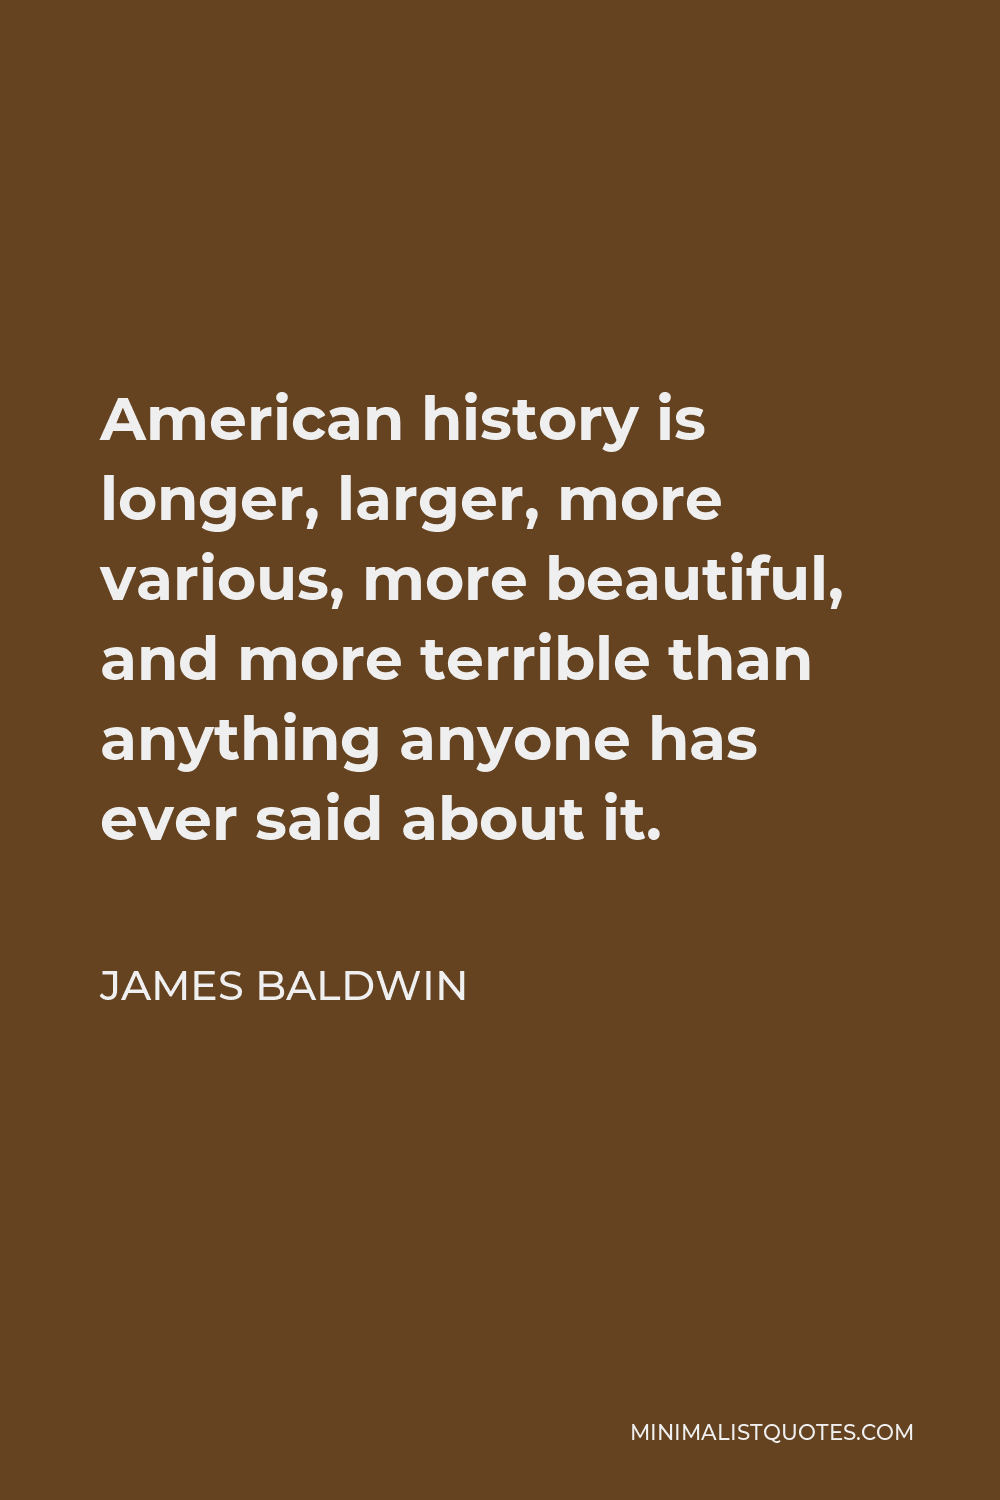 James Baldwin Quote - American history is longer, larger, more various, more beautiful, and more terrible than anything anyone has ever said about it.